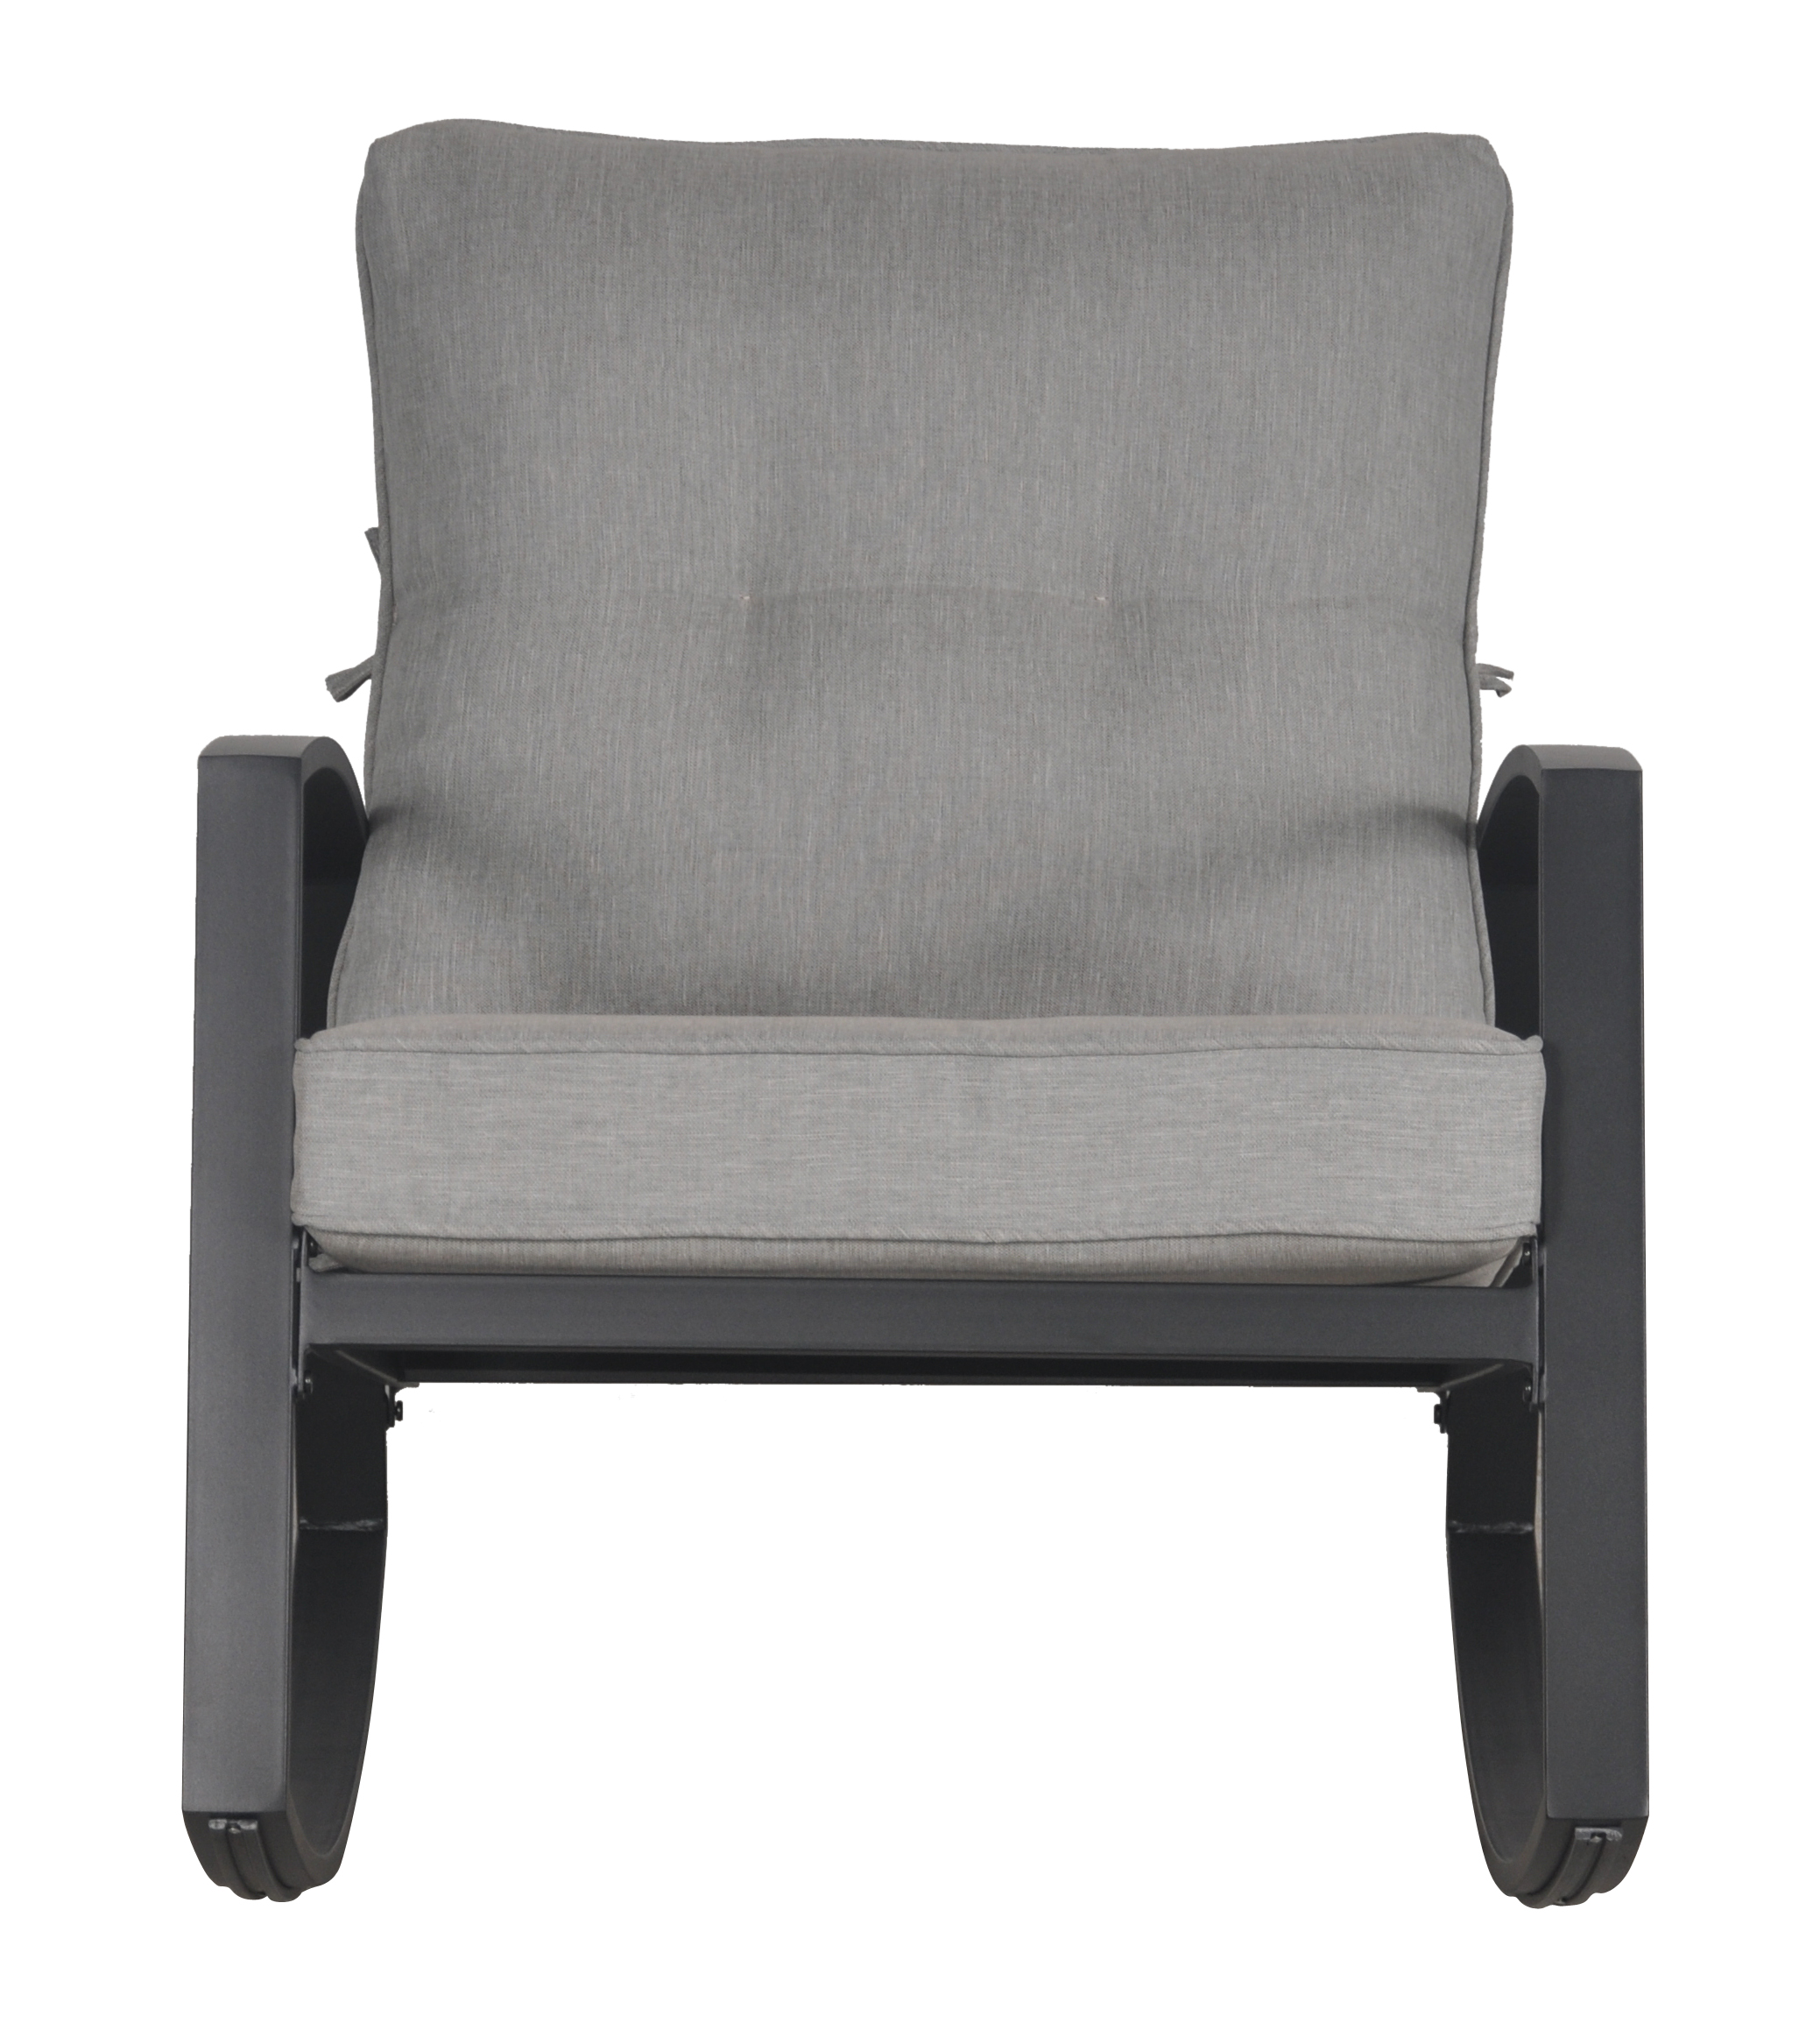 Mainstays Asher Springs 2-Piece Outdoor Furniture Patio Rocker Set -Grey - image 4 of 8